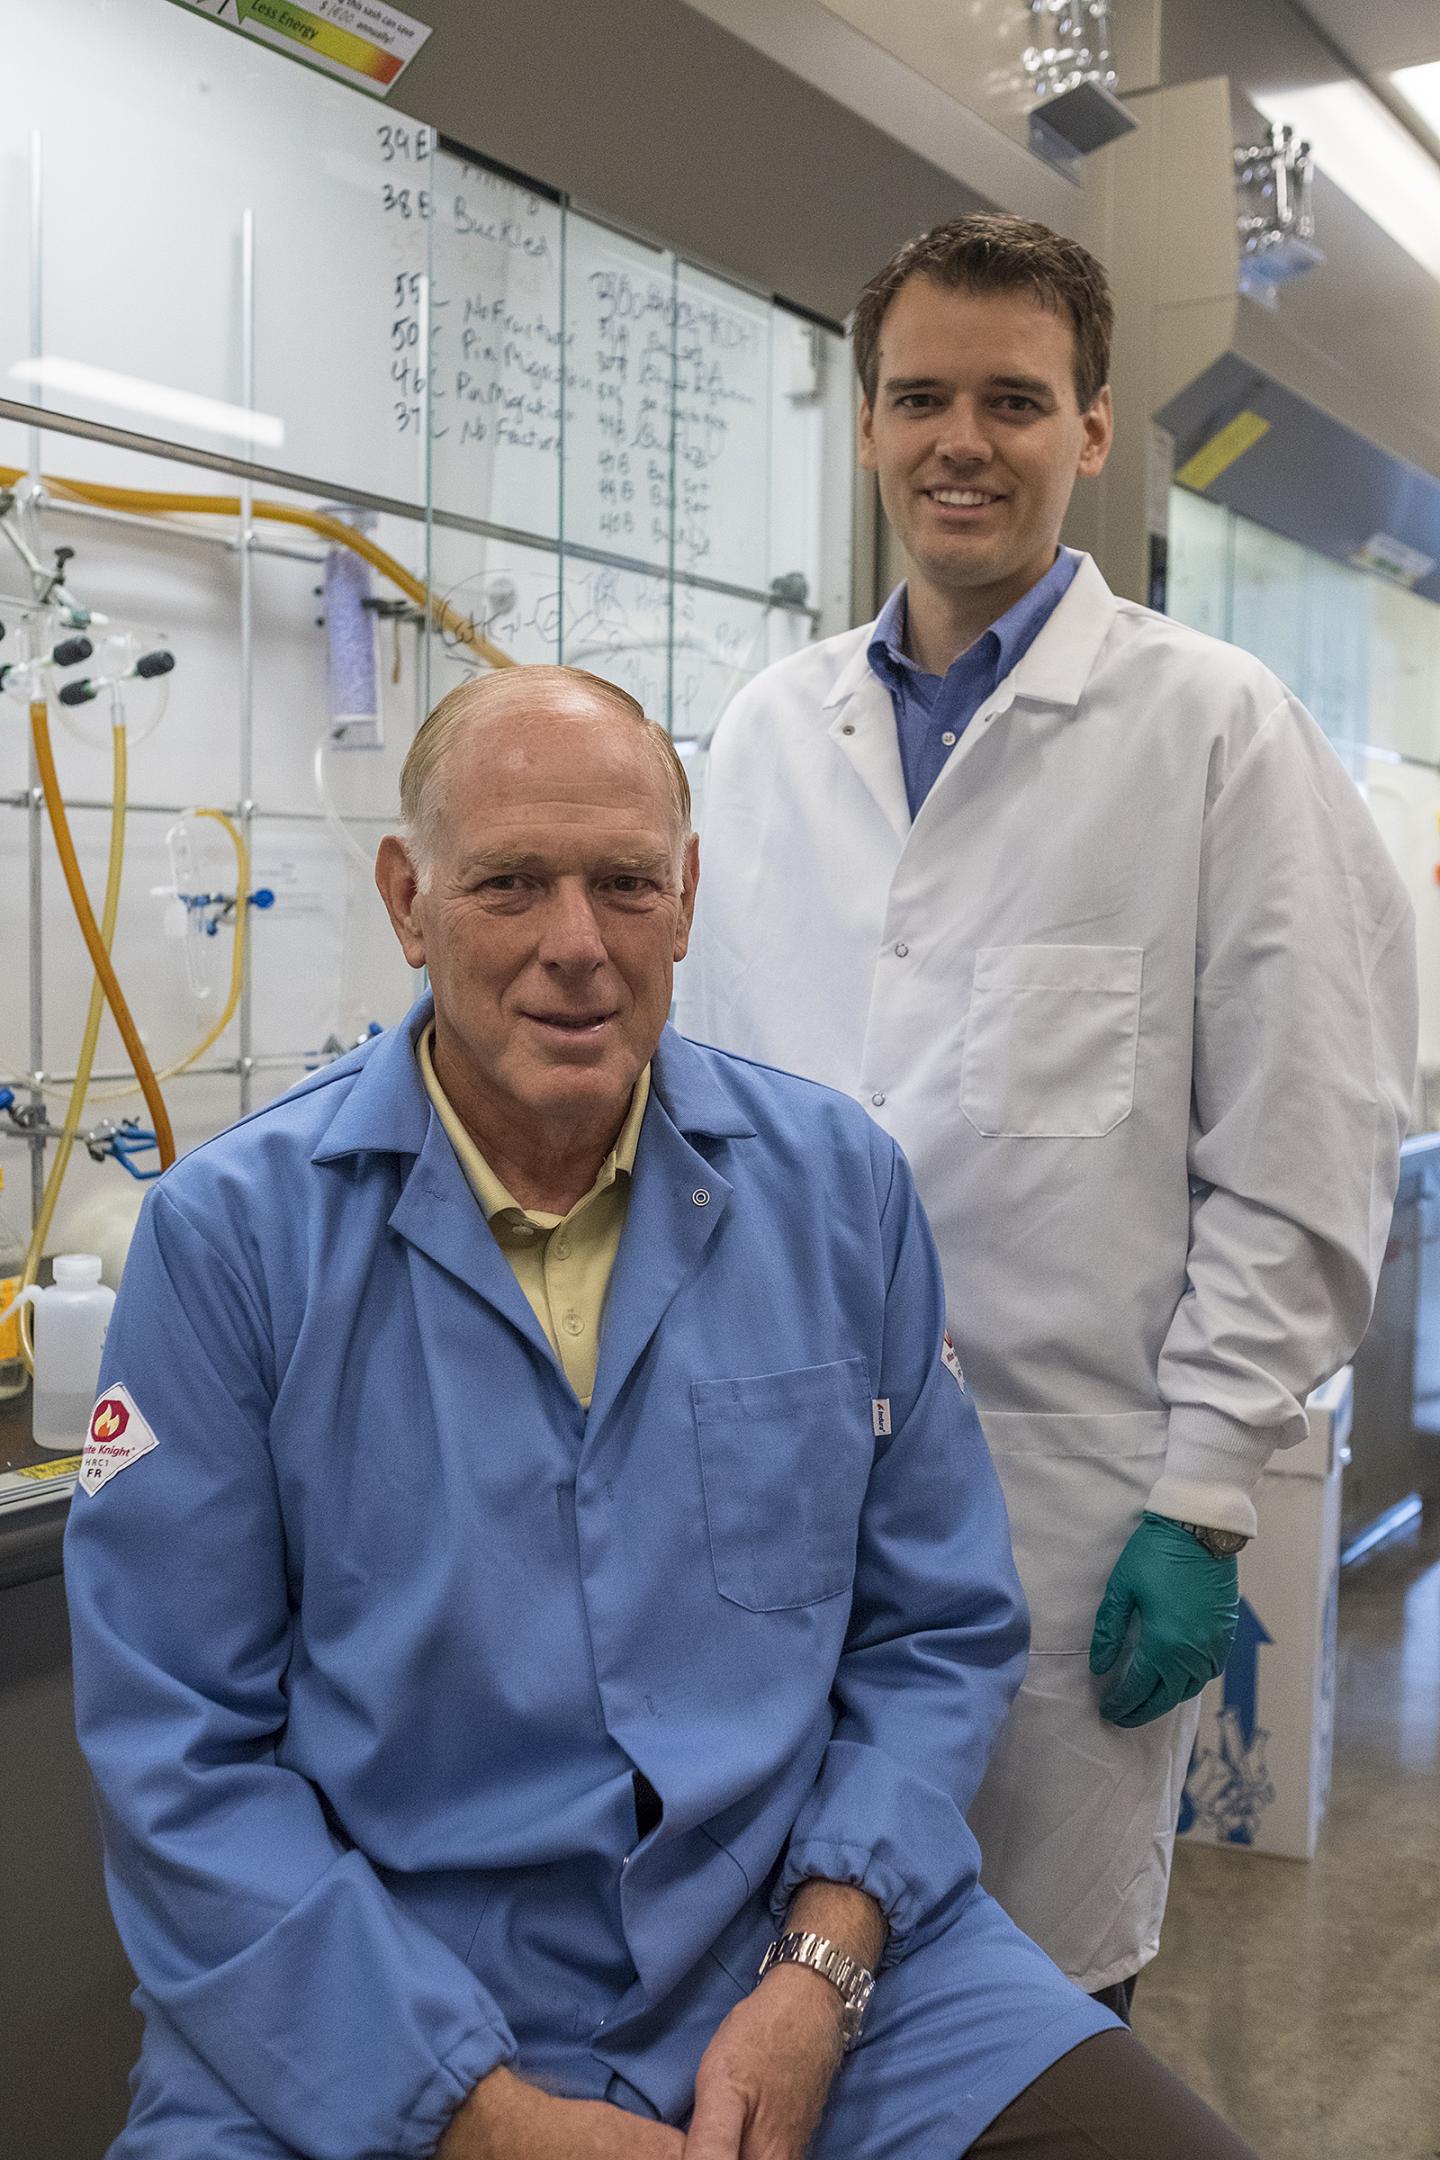 Purdue University Father and Son Esteemed Researchers